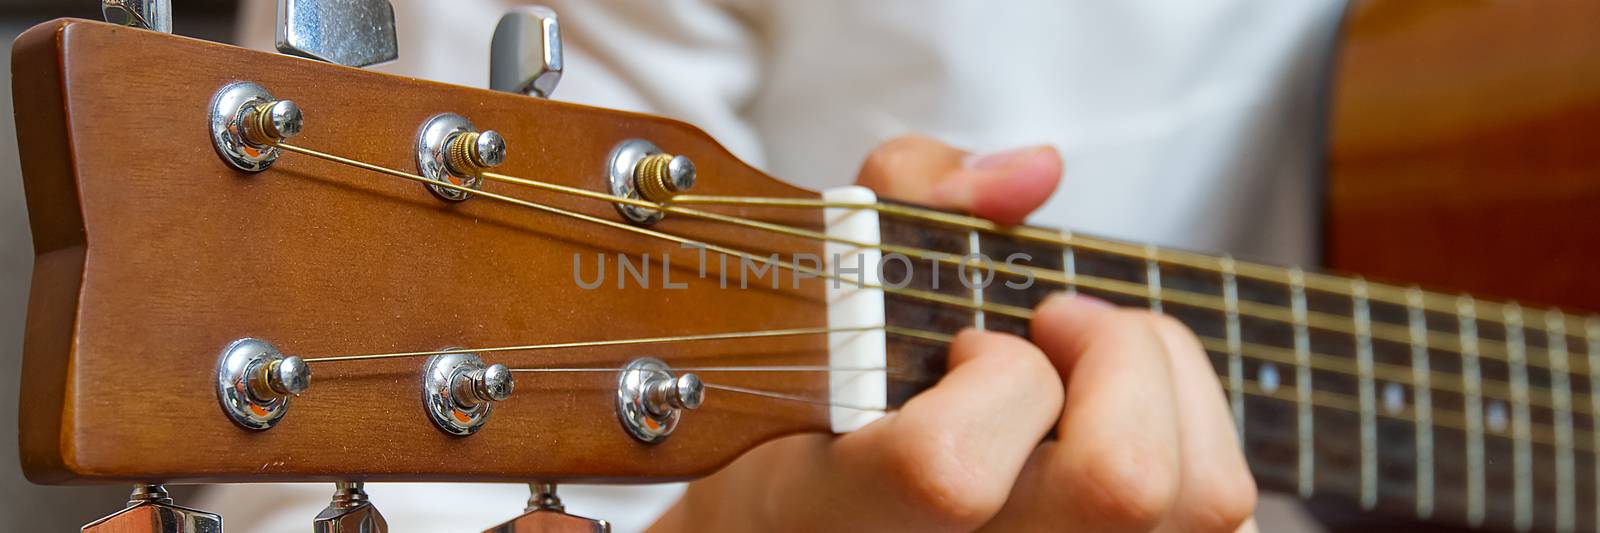 Young boy playing guitar. Close-up of man hand playing classic guitar. teenager learning playing guitar, Banner or panoramic shot.